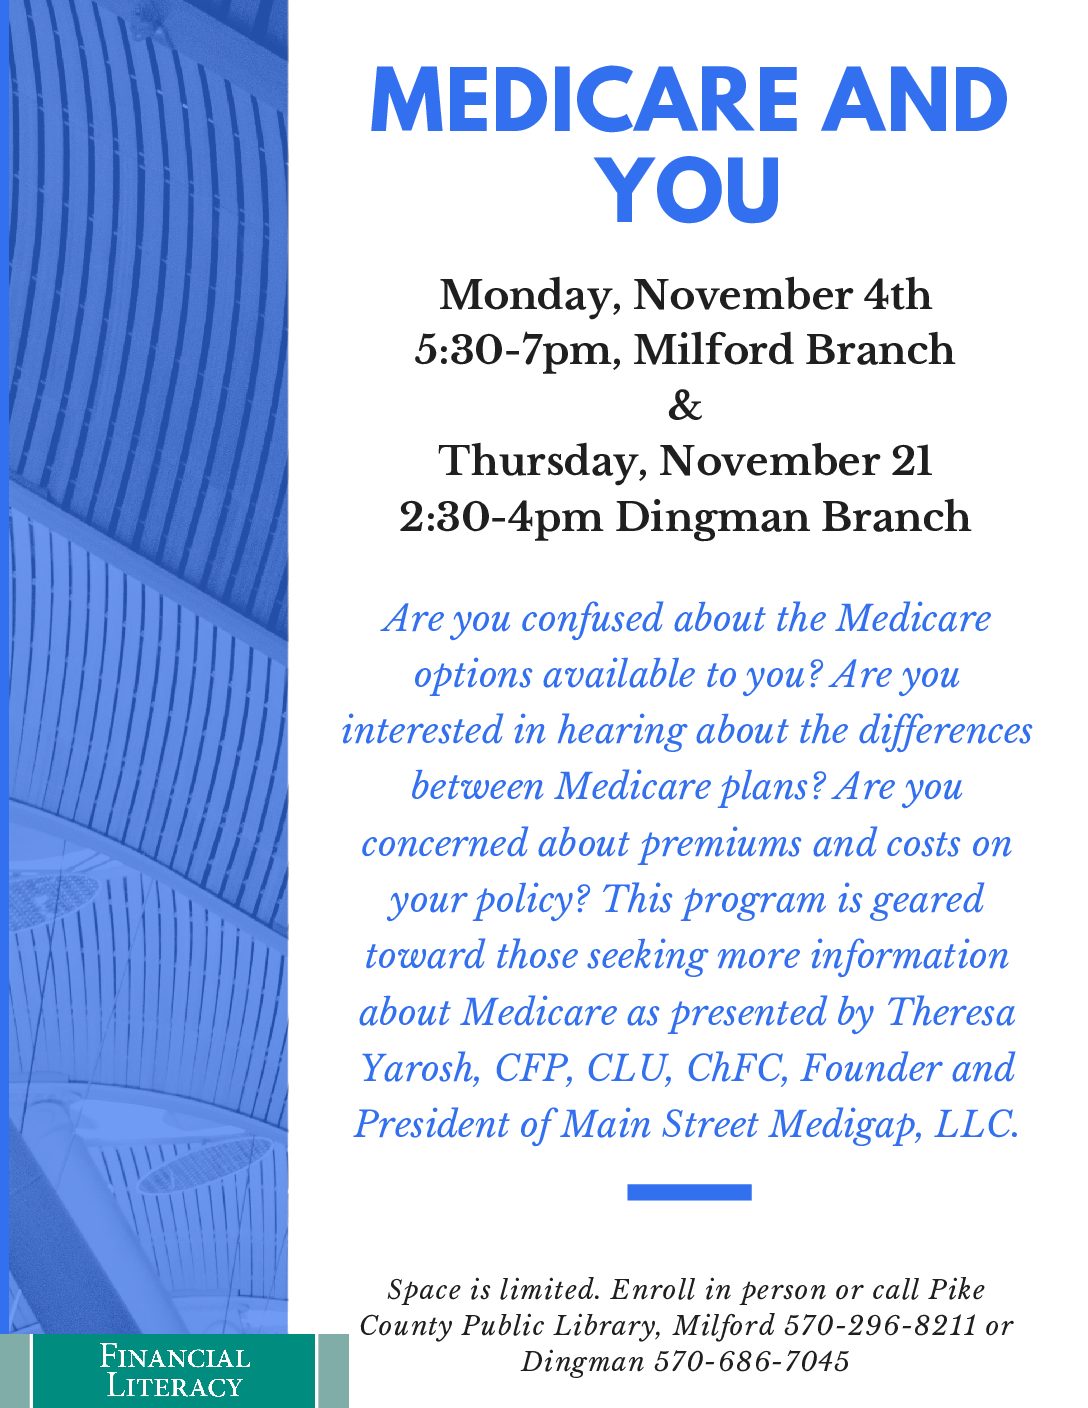 Medicare and You Pike County Public Library